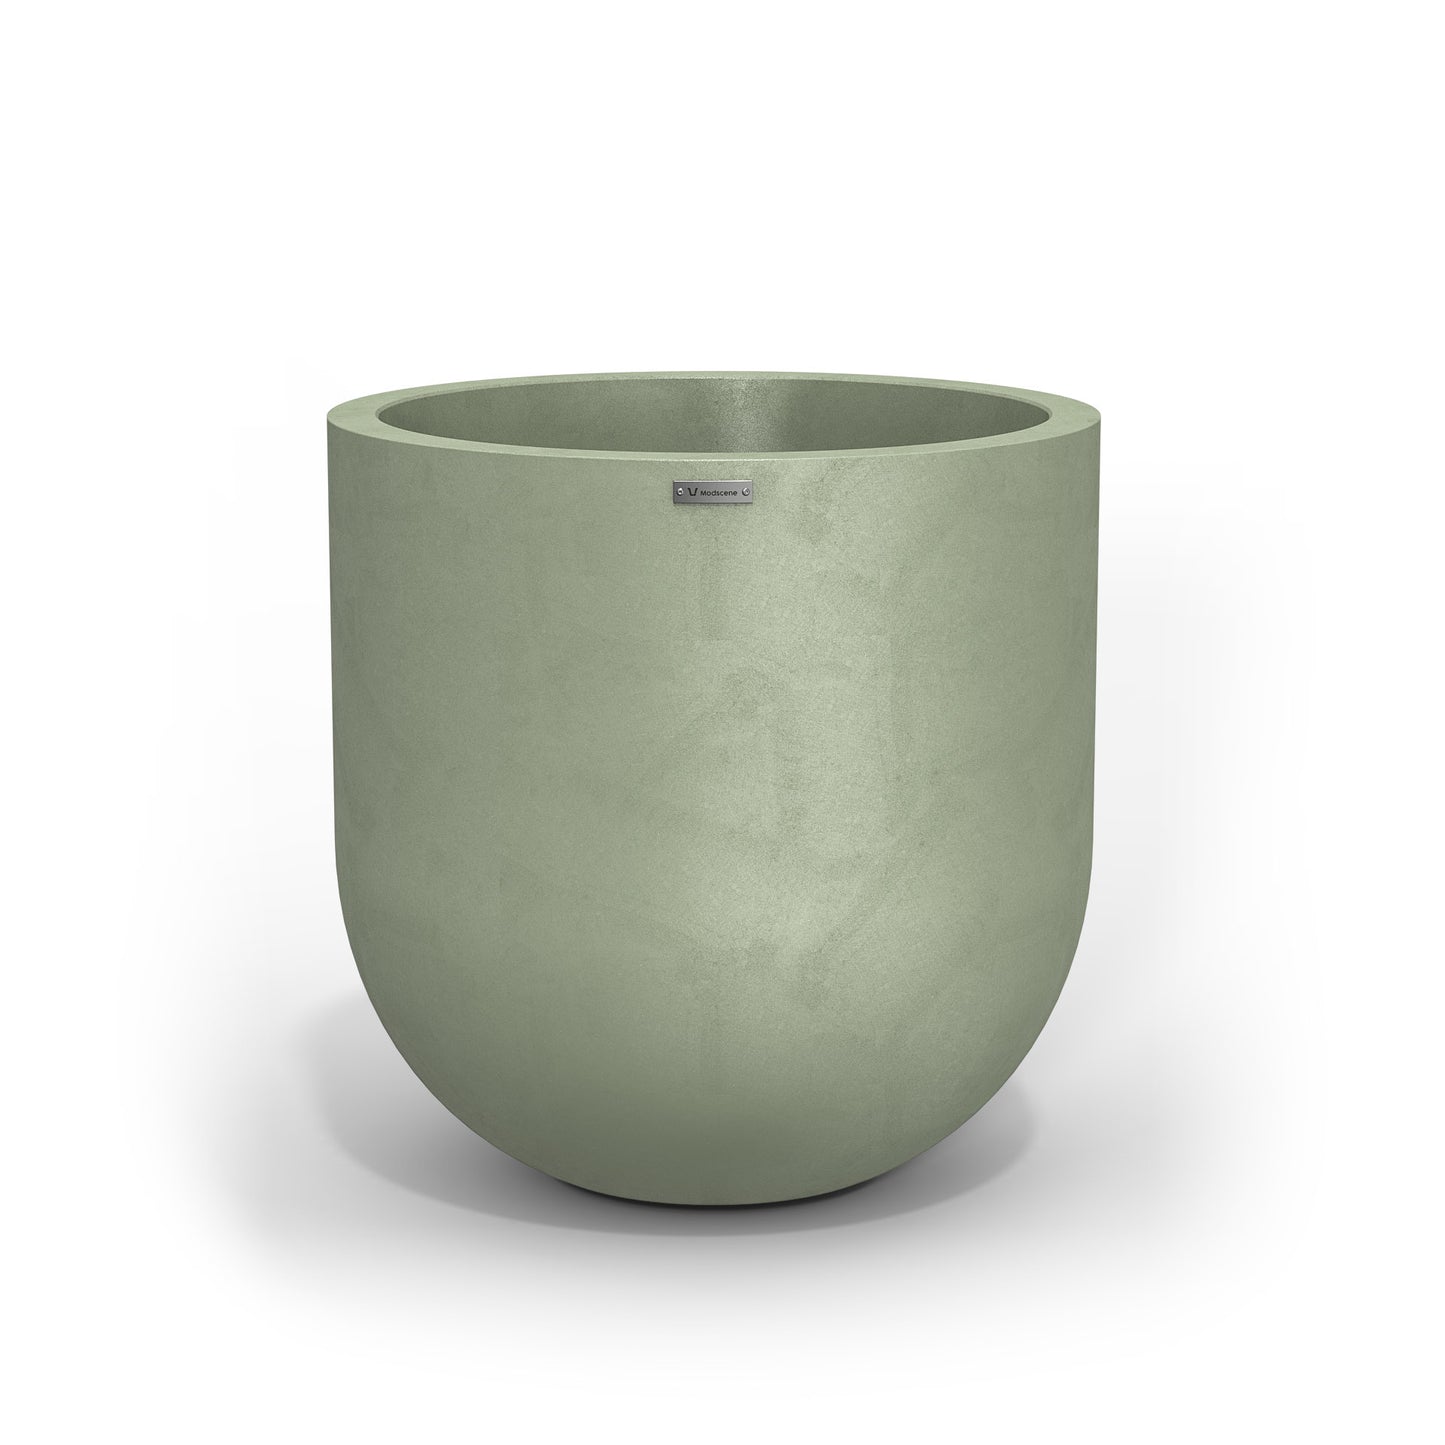 Large Modscene planter pot in a green colour with concrete look. NZ made